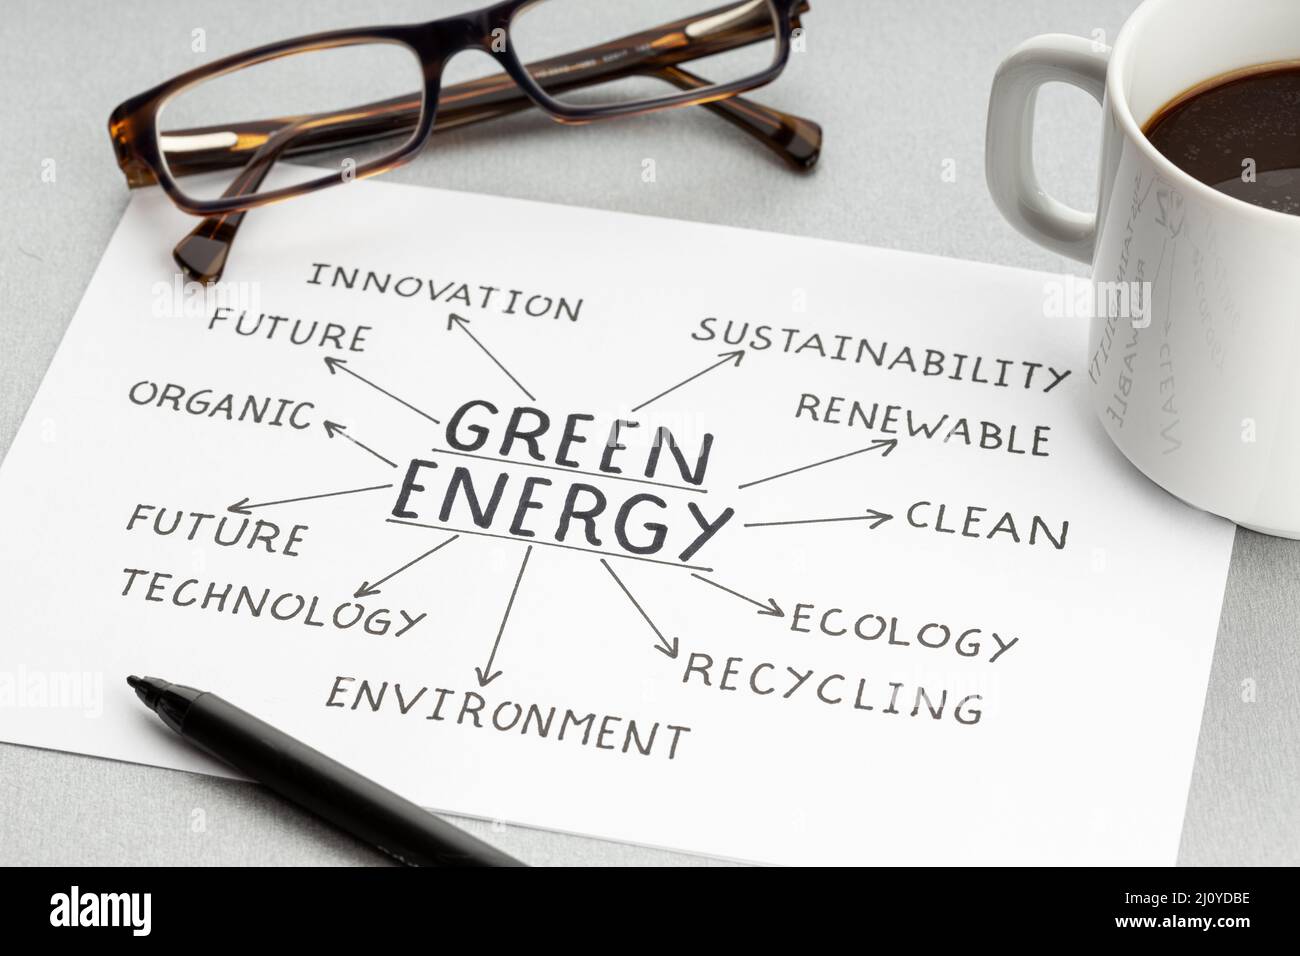 Green energy development concept. Paper sheet with quality ideas or plan, cup of coffee and eyeglasses on desk Stock Photo